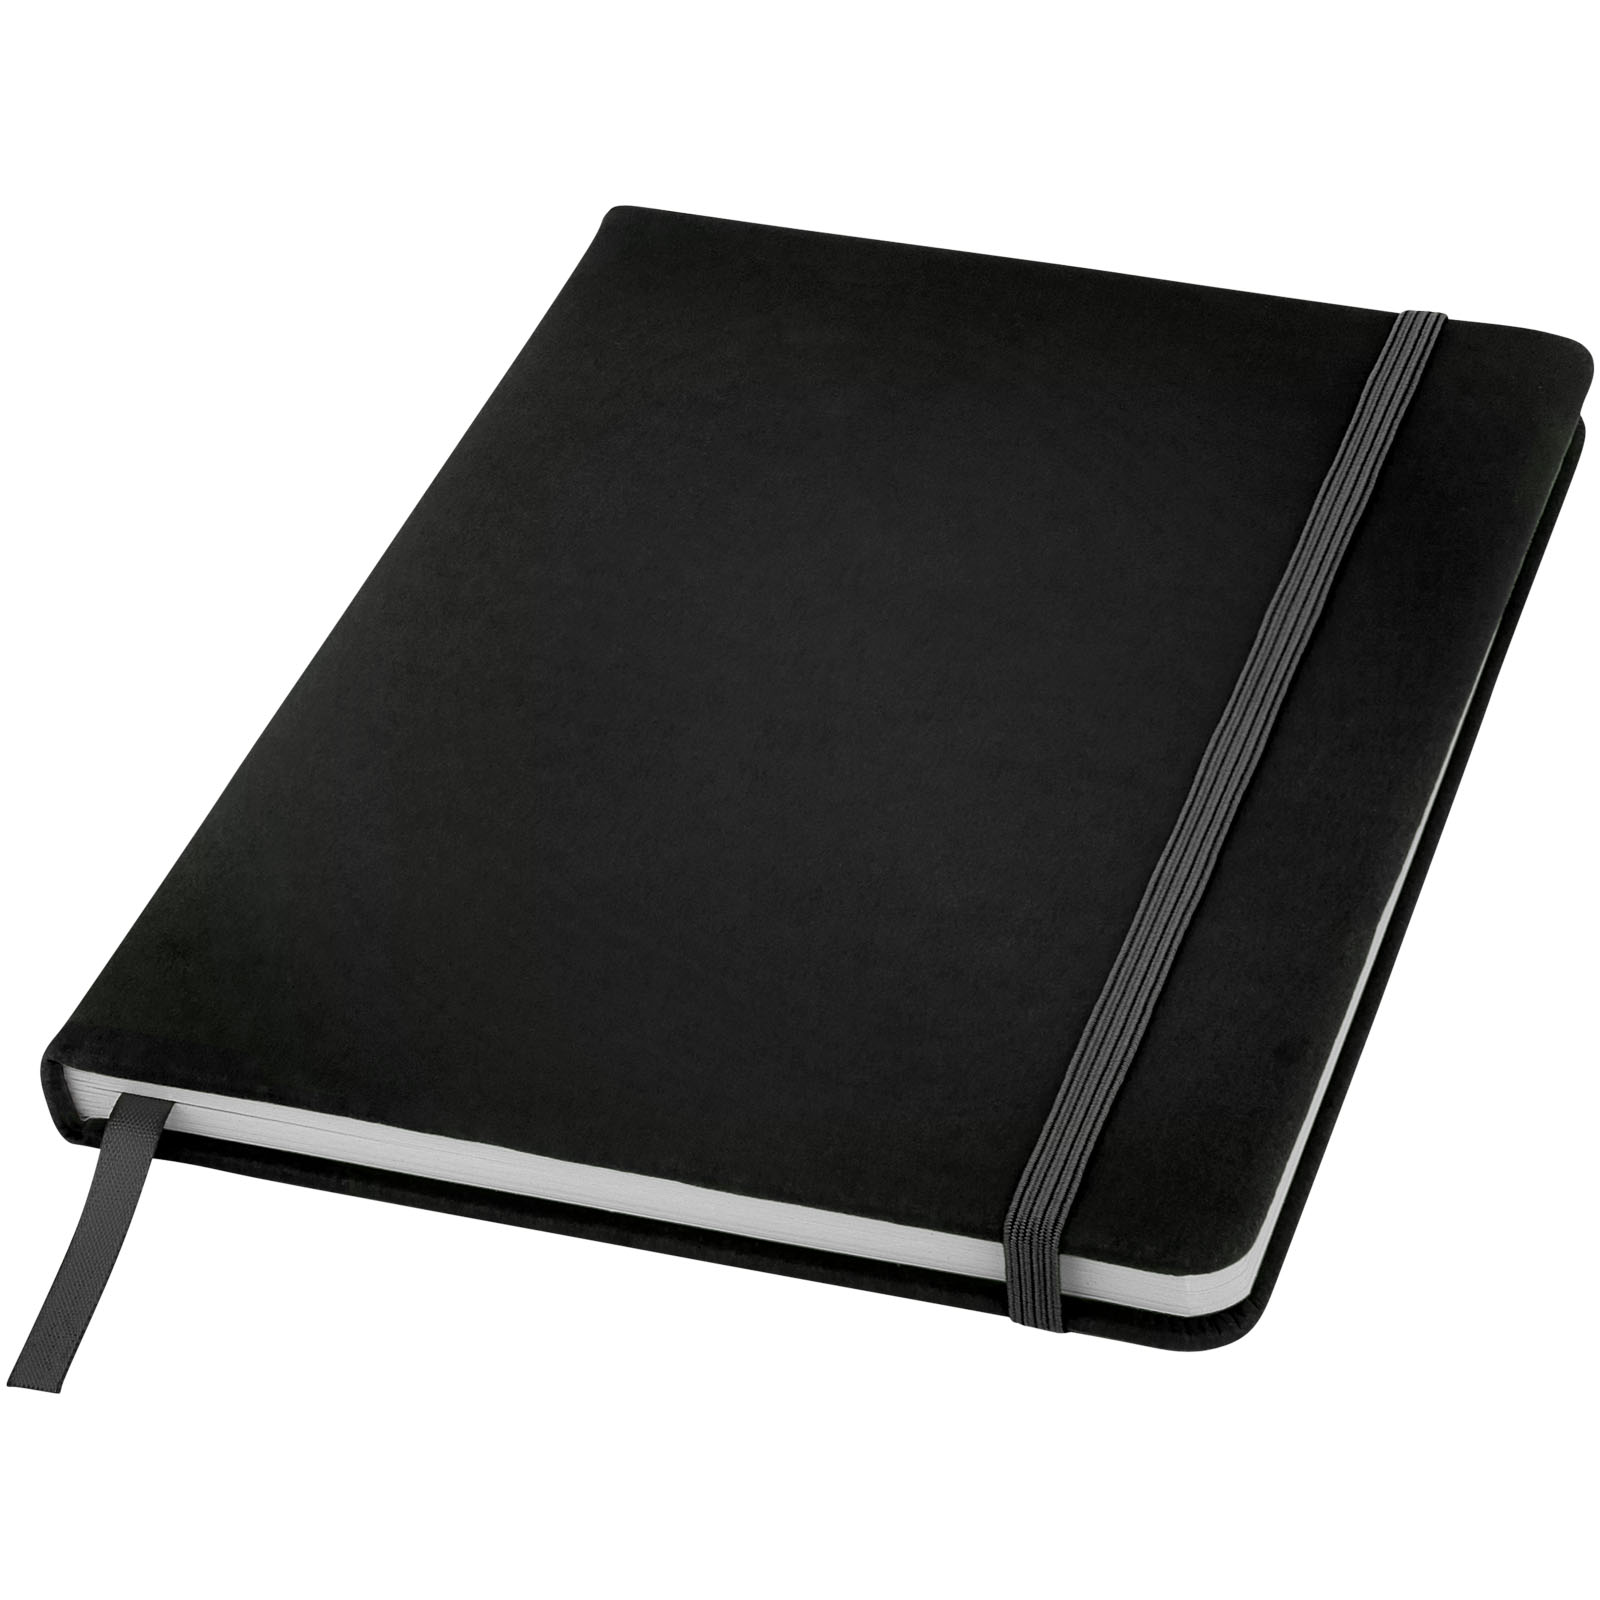 Advertising Hard cover notebooks - Spectrum A5 hard cover notebook - 0